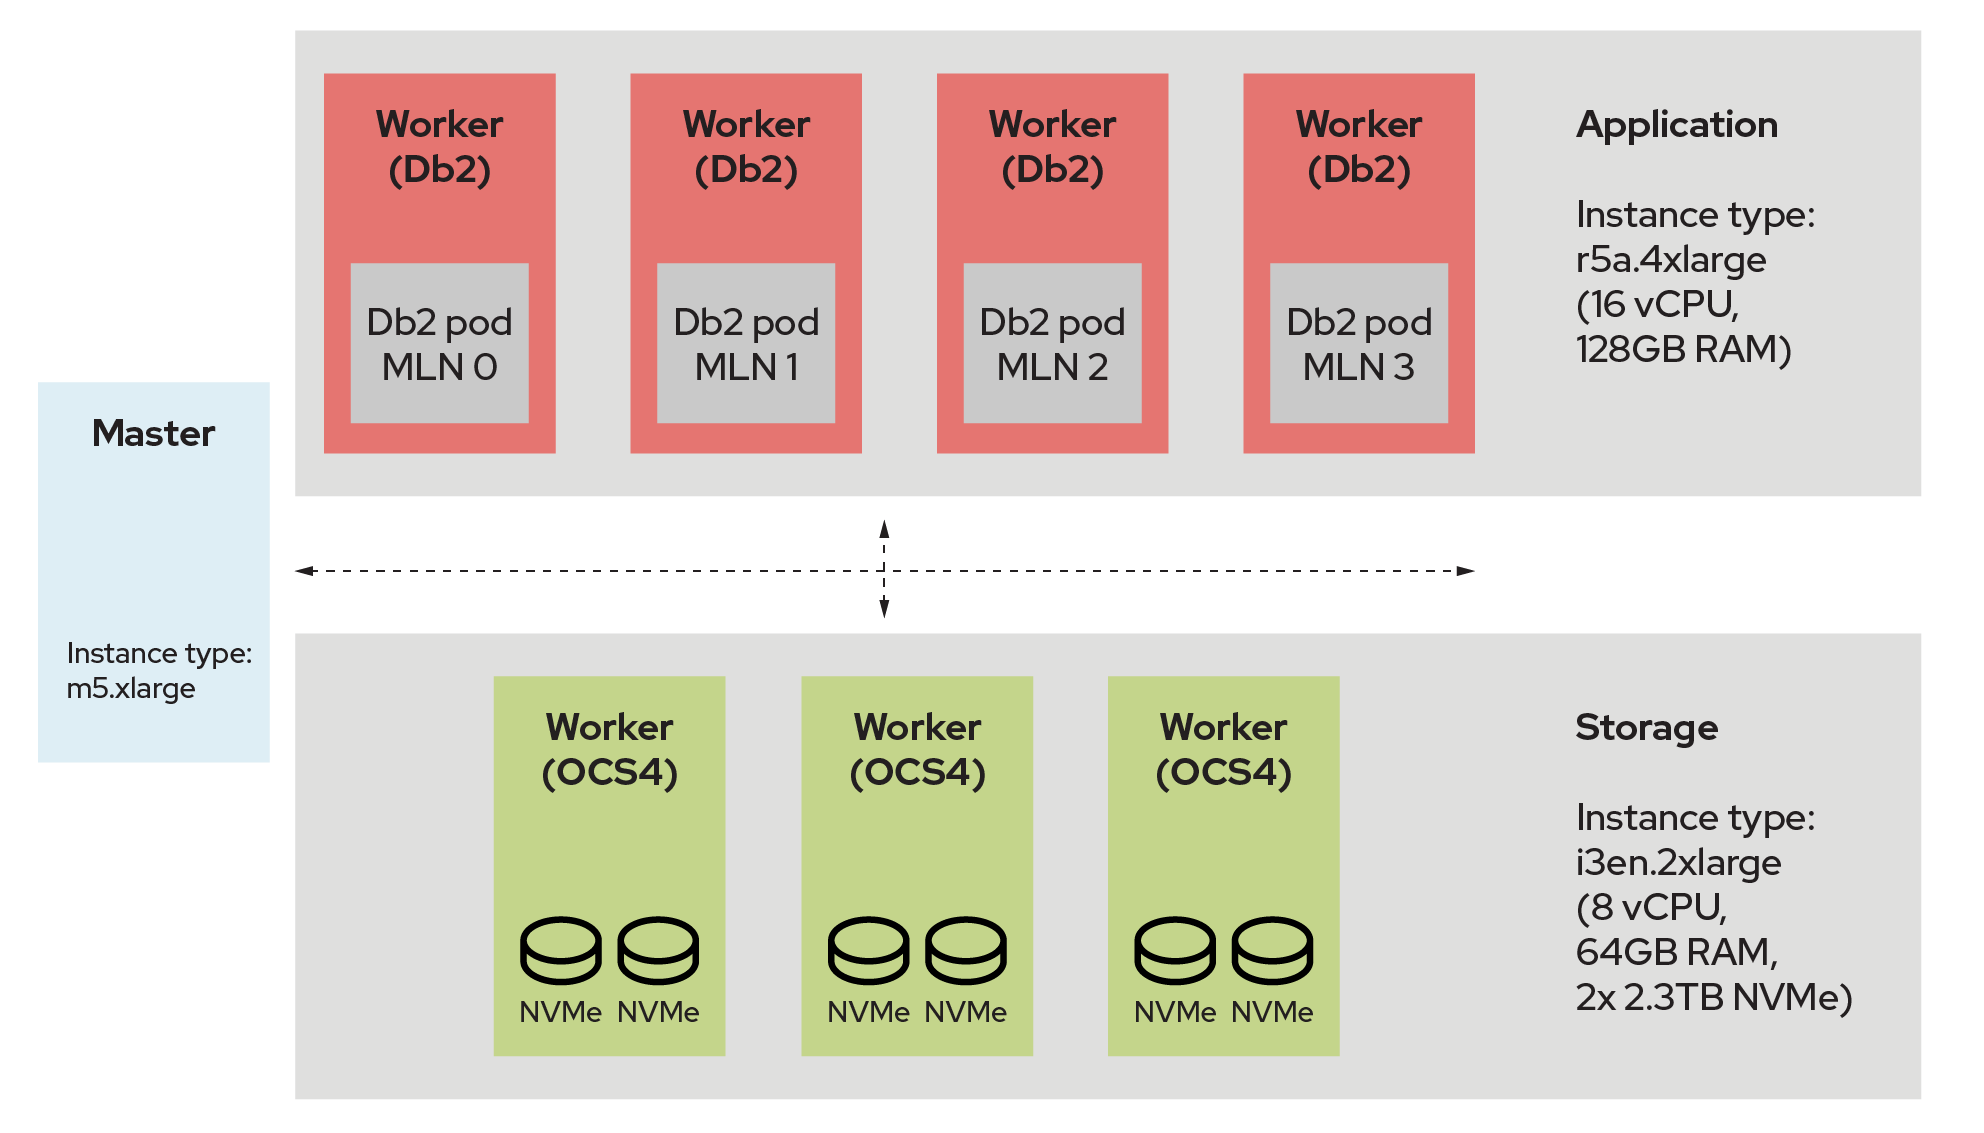 Diagram showing worker and storage instances for Db2 testing